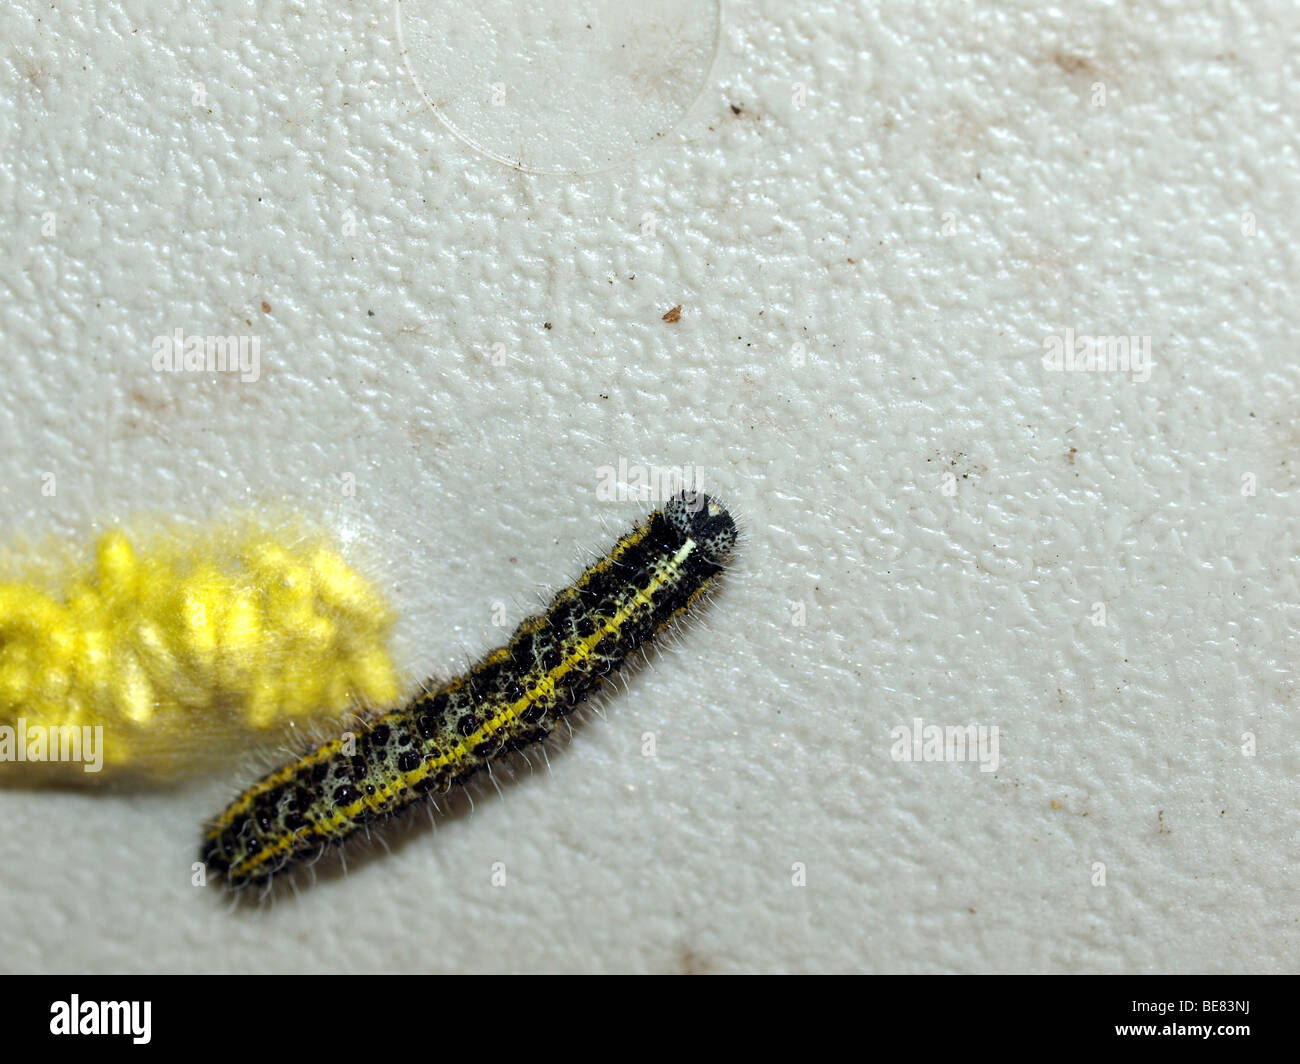 Caterpillar of a small white butterfly with the yellow cocoons of the braconid wasp(Apanteles glomeratus). Stock Photo